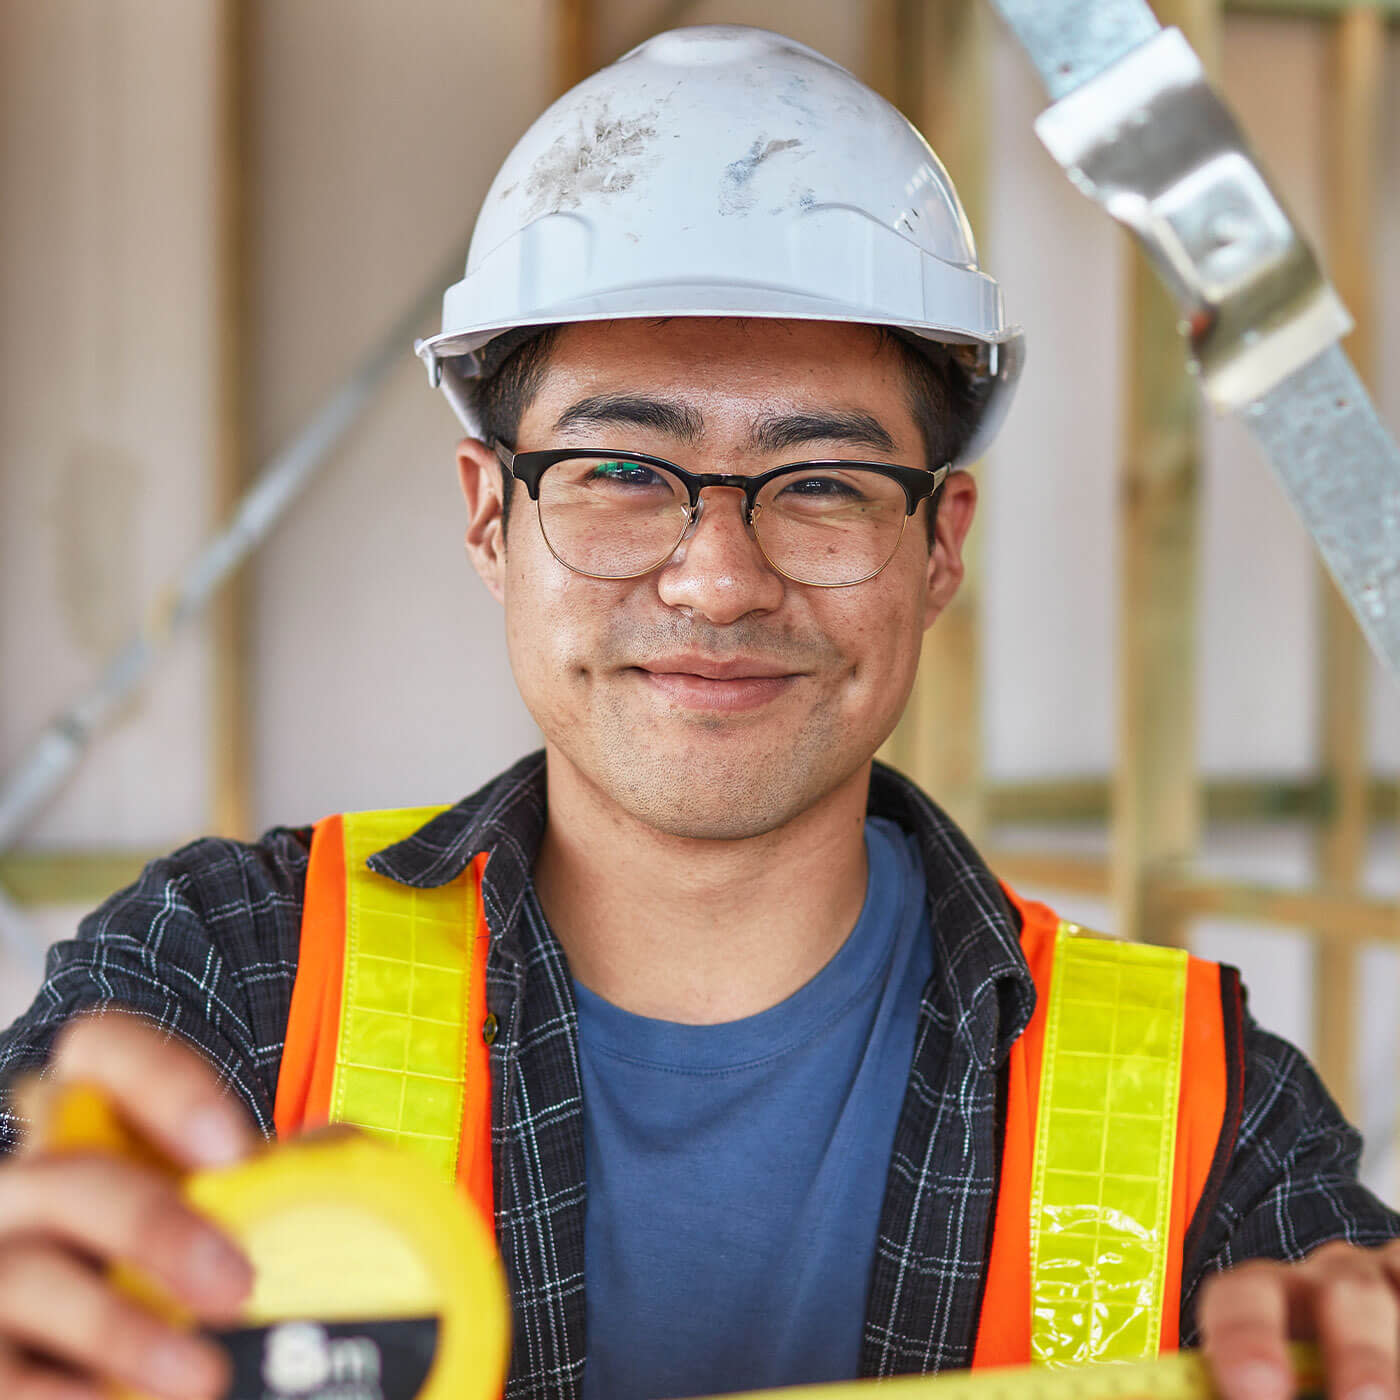 Construction worker smiling into camera wearing PPE